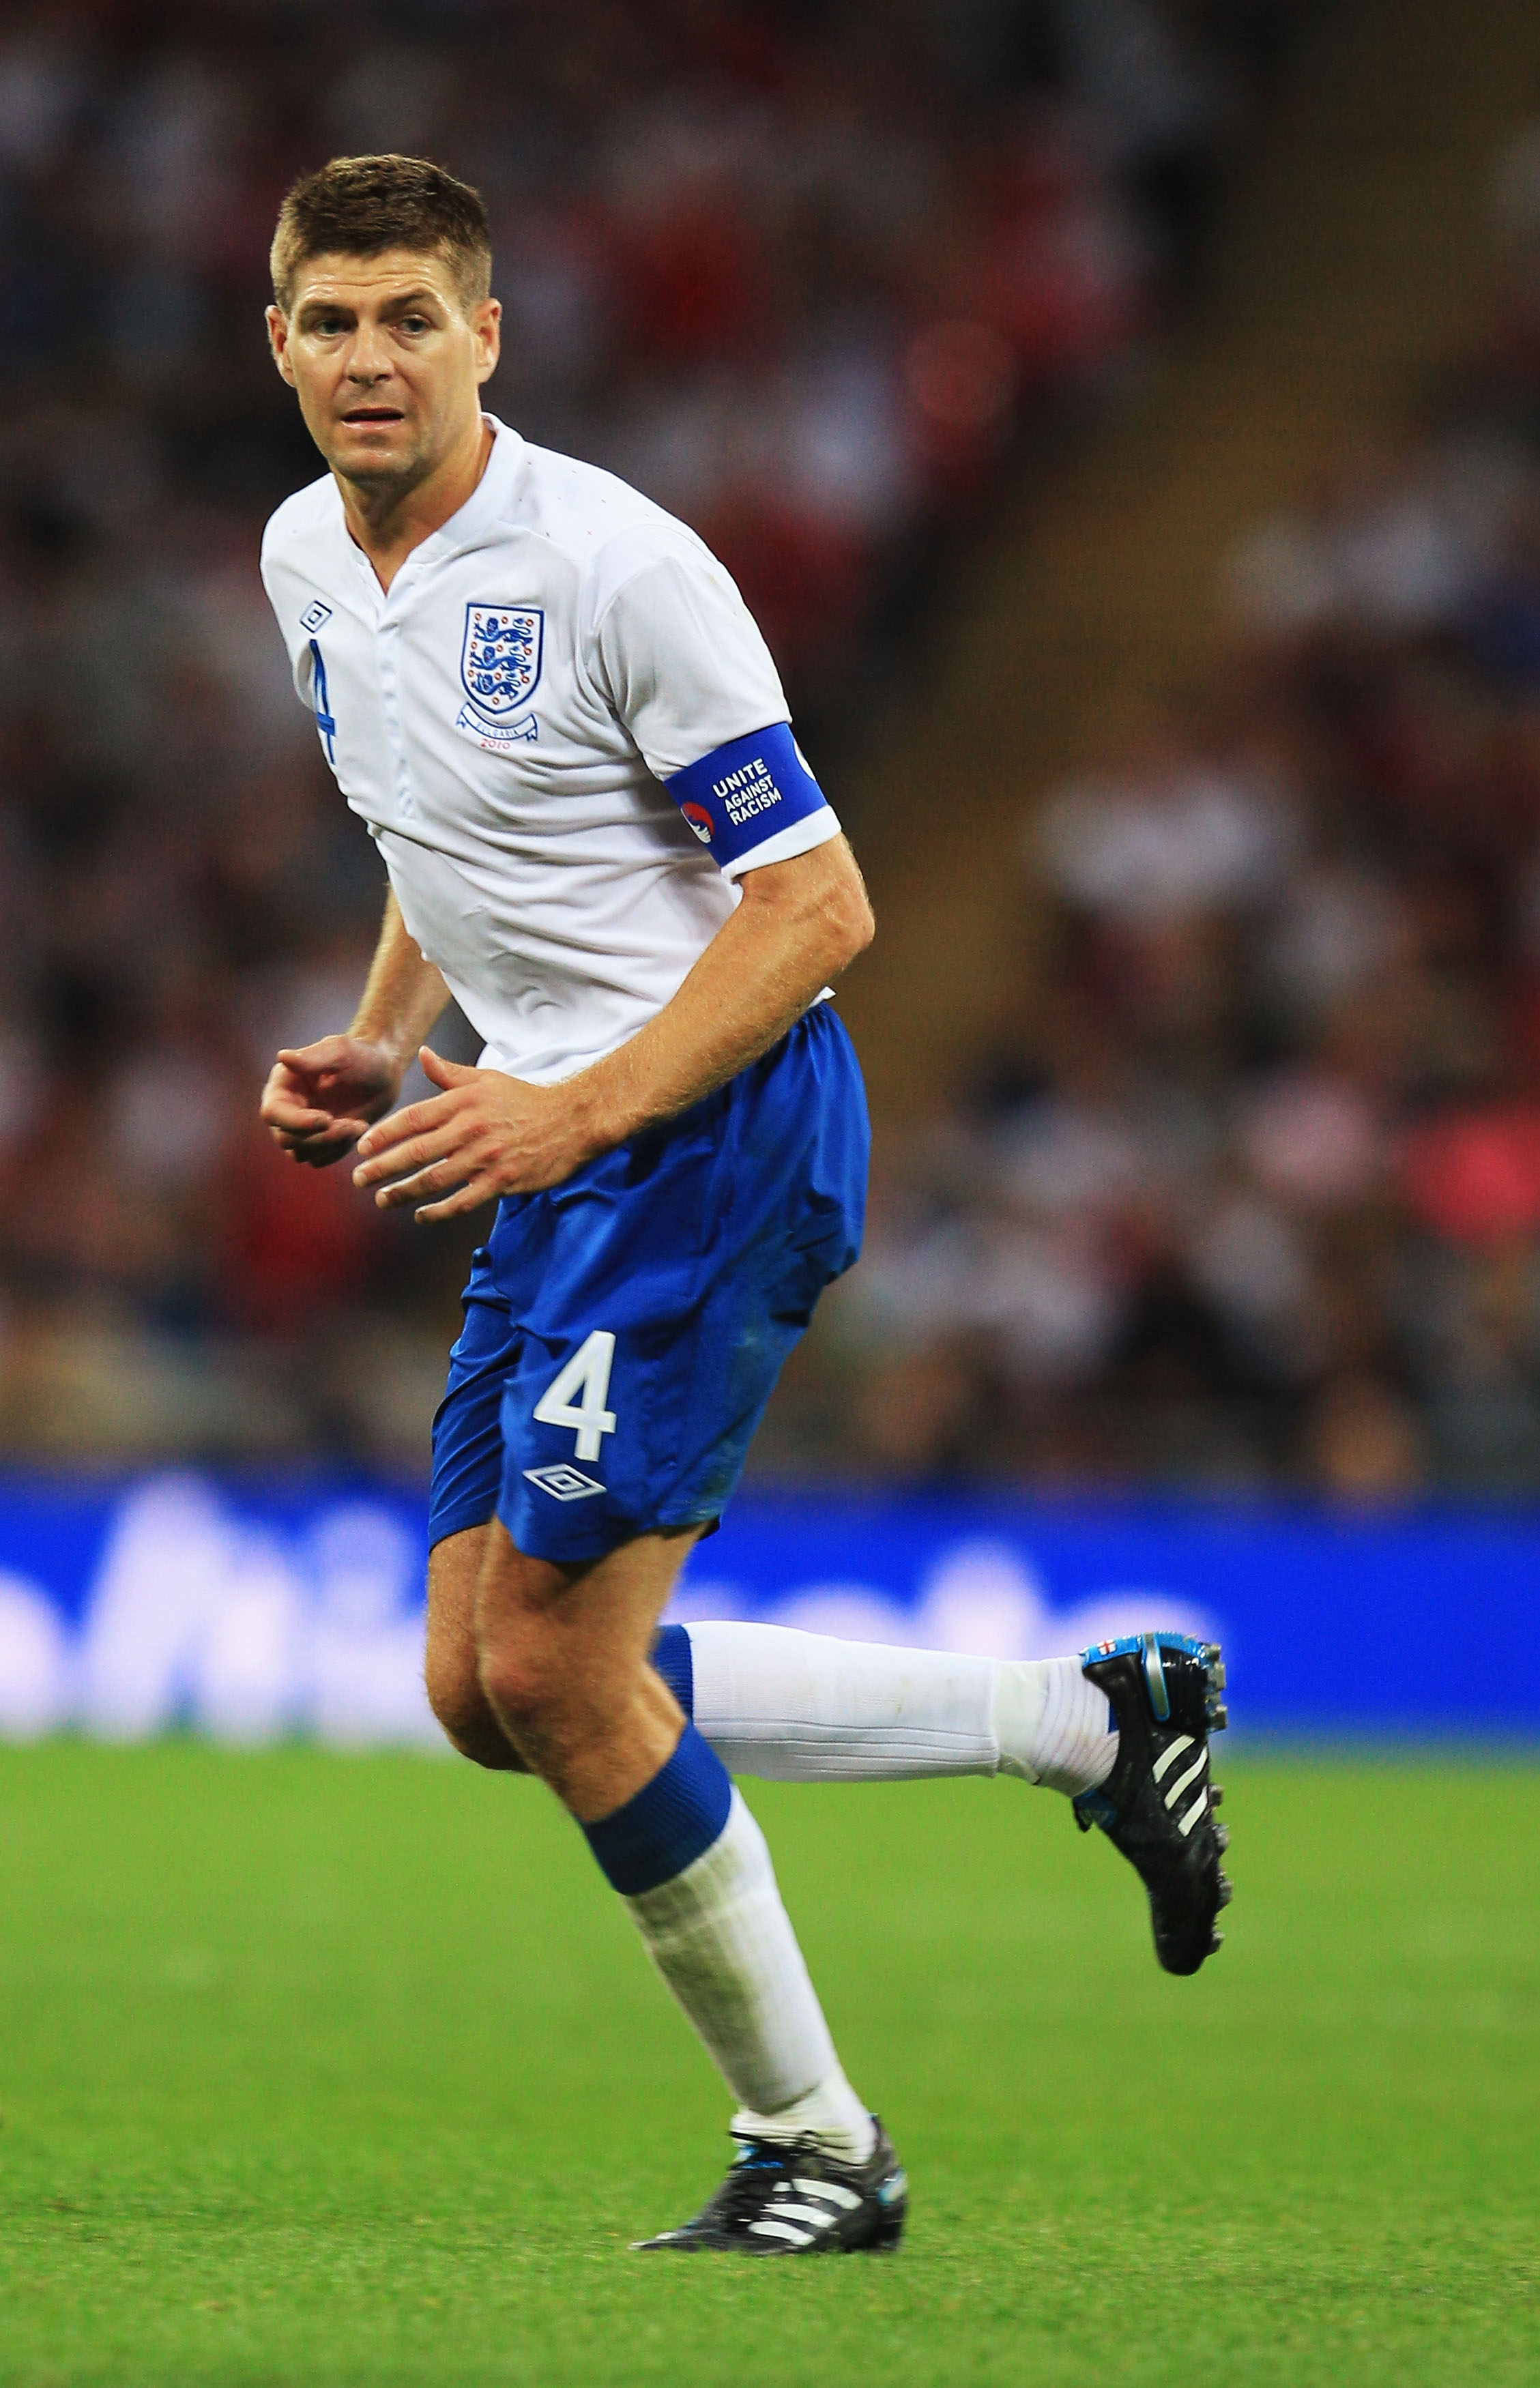 LONDON, ENGLAND - SEPTEMBER 03:  Steven Gerrard of England is seen during the UEFA EURO 2012 Group G Qualifying match between England and Bulgaria at Wembley Stadium on September 3, 2010 in London, England.  (Photo by Mark Thompson/Getty Images)